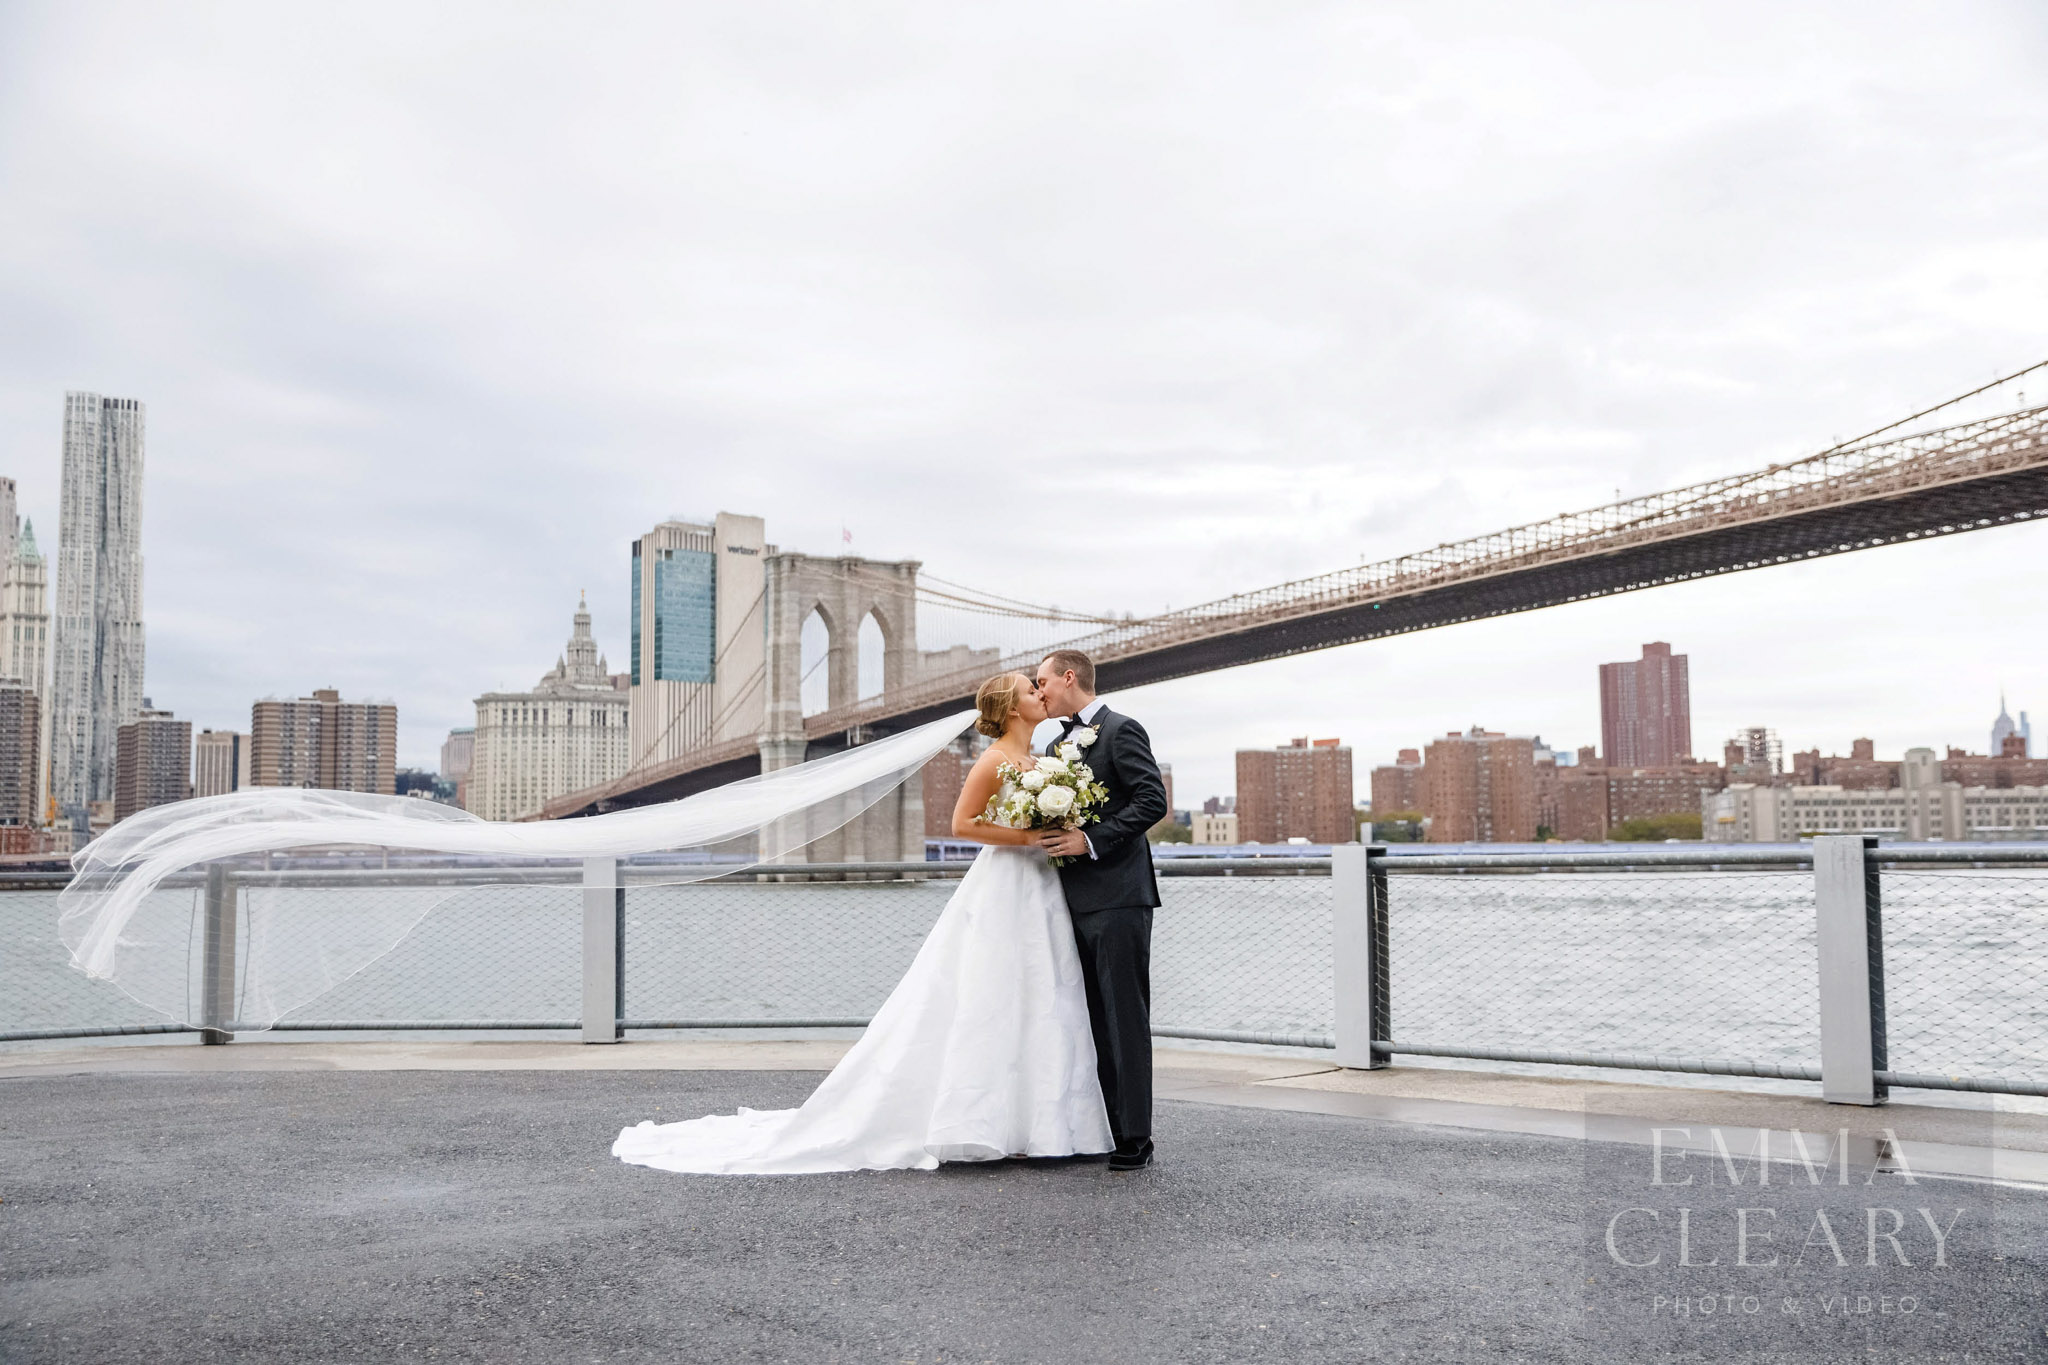 Wedding kiss with a view of the city